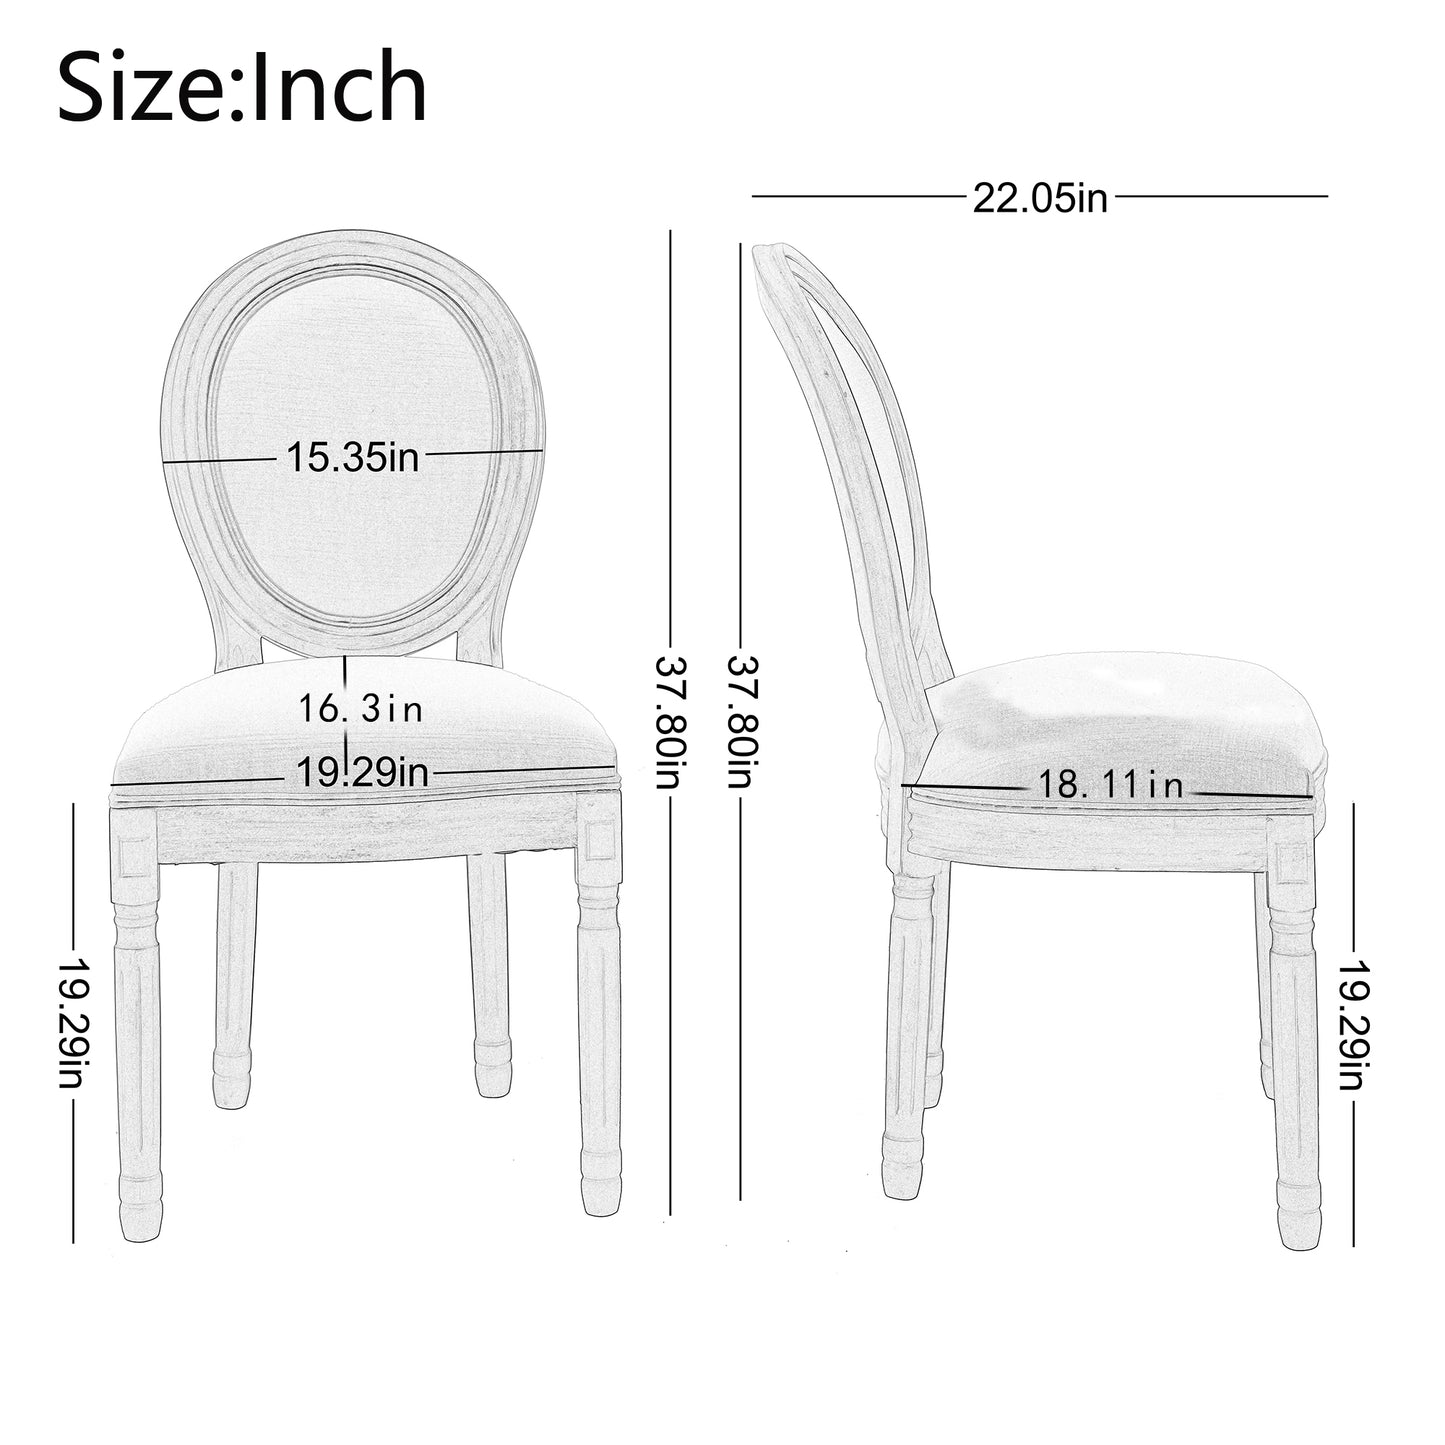 French Country Fabric Dining Chairs Set of 2 W21232647